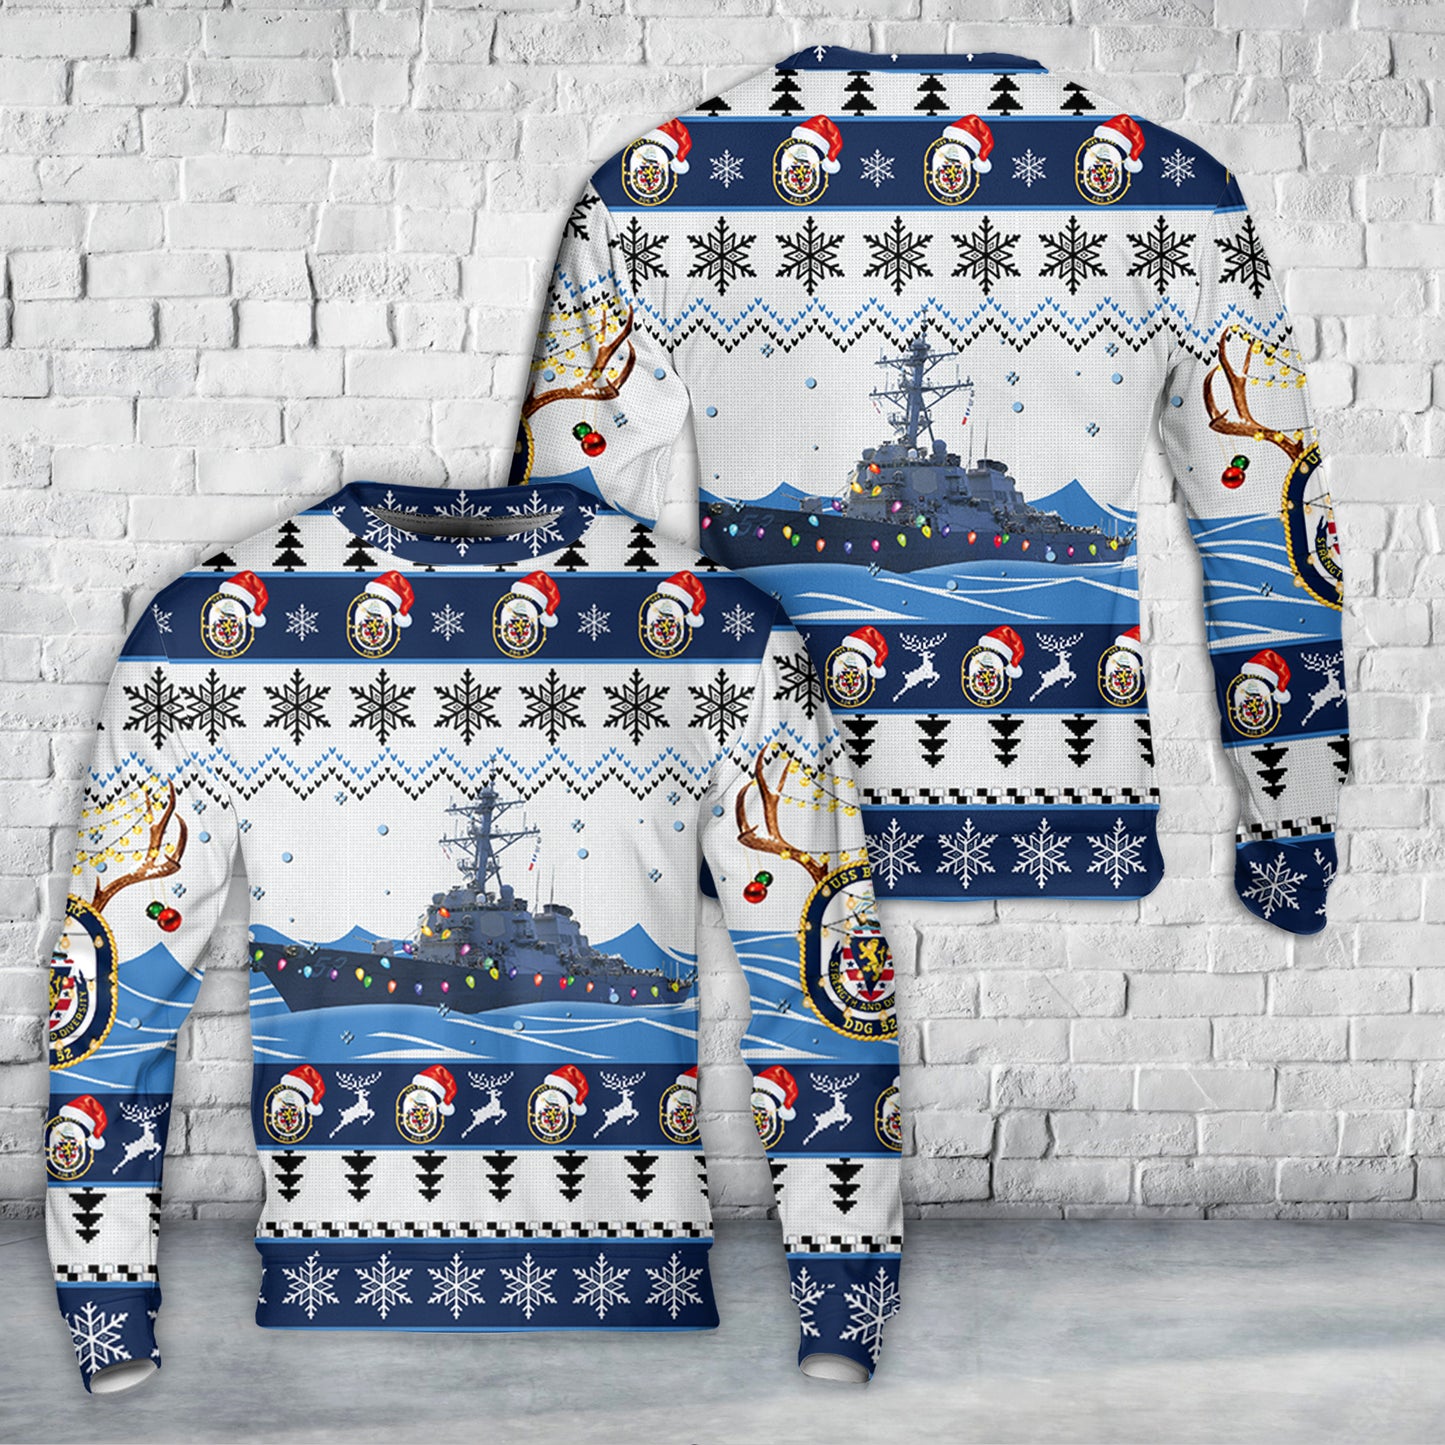 US Navy USS Barry (DDG-52) Arleigh Burke-class guided-missile destroyers Christmas Sweater